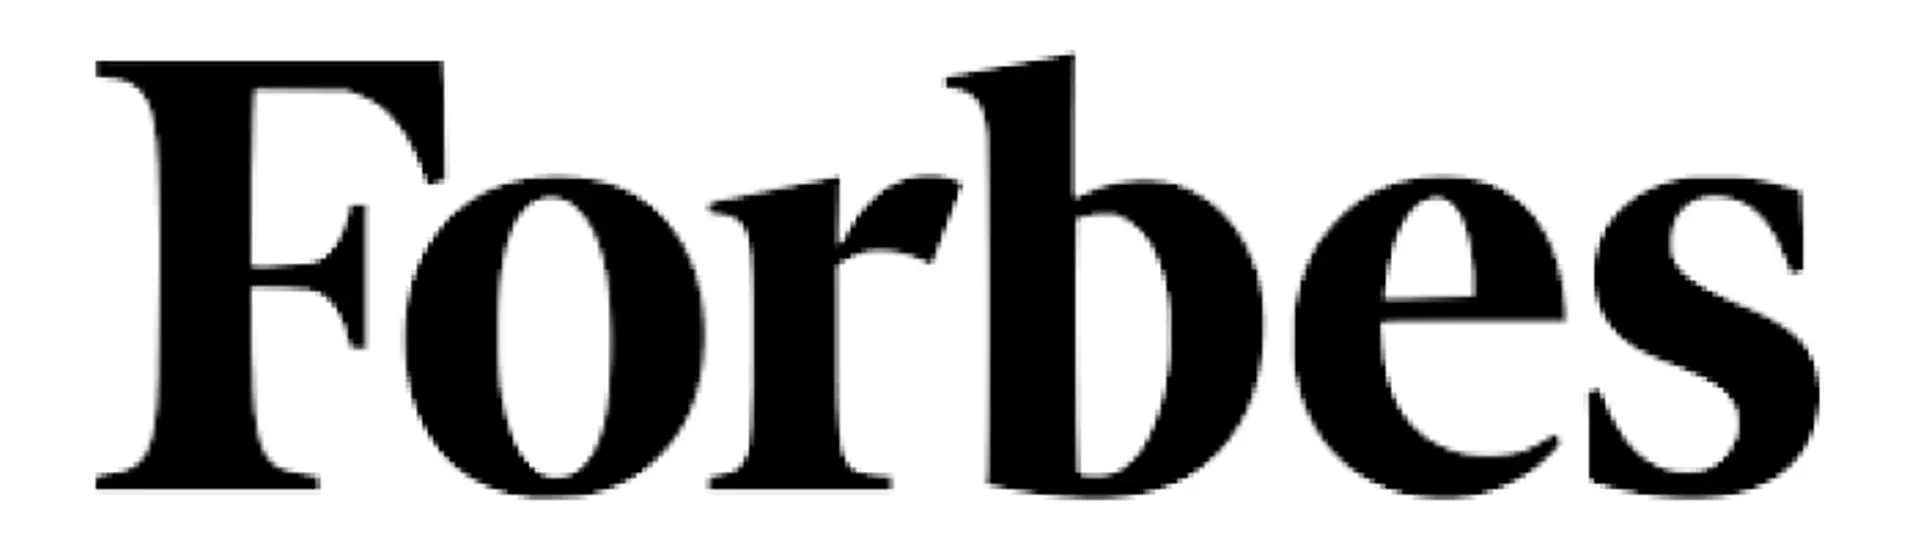 Logo of Forbes magazine displayed in bold black letters on a white background.